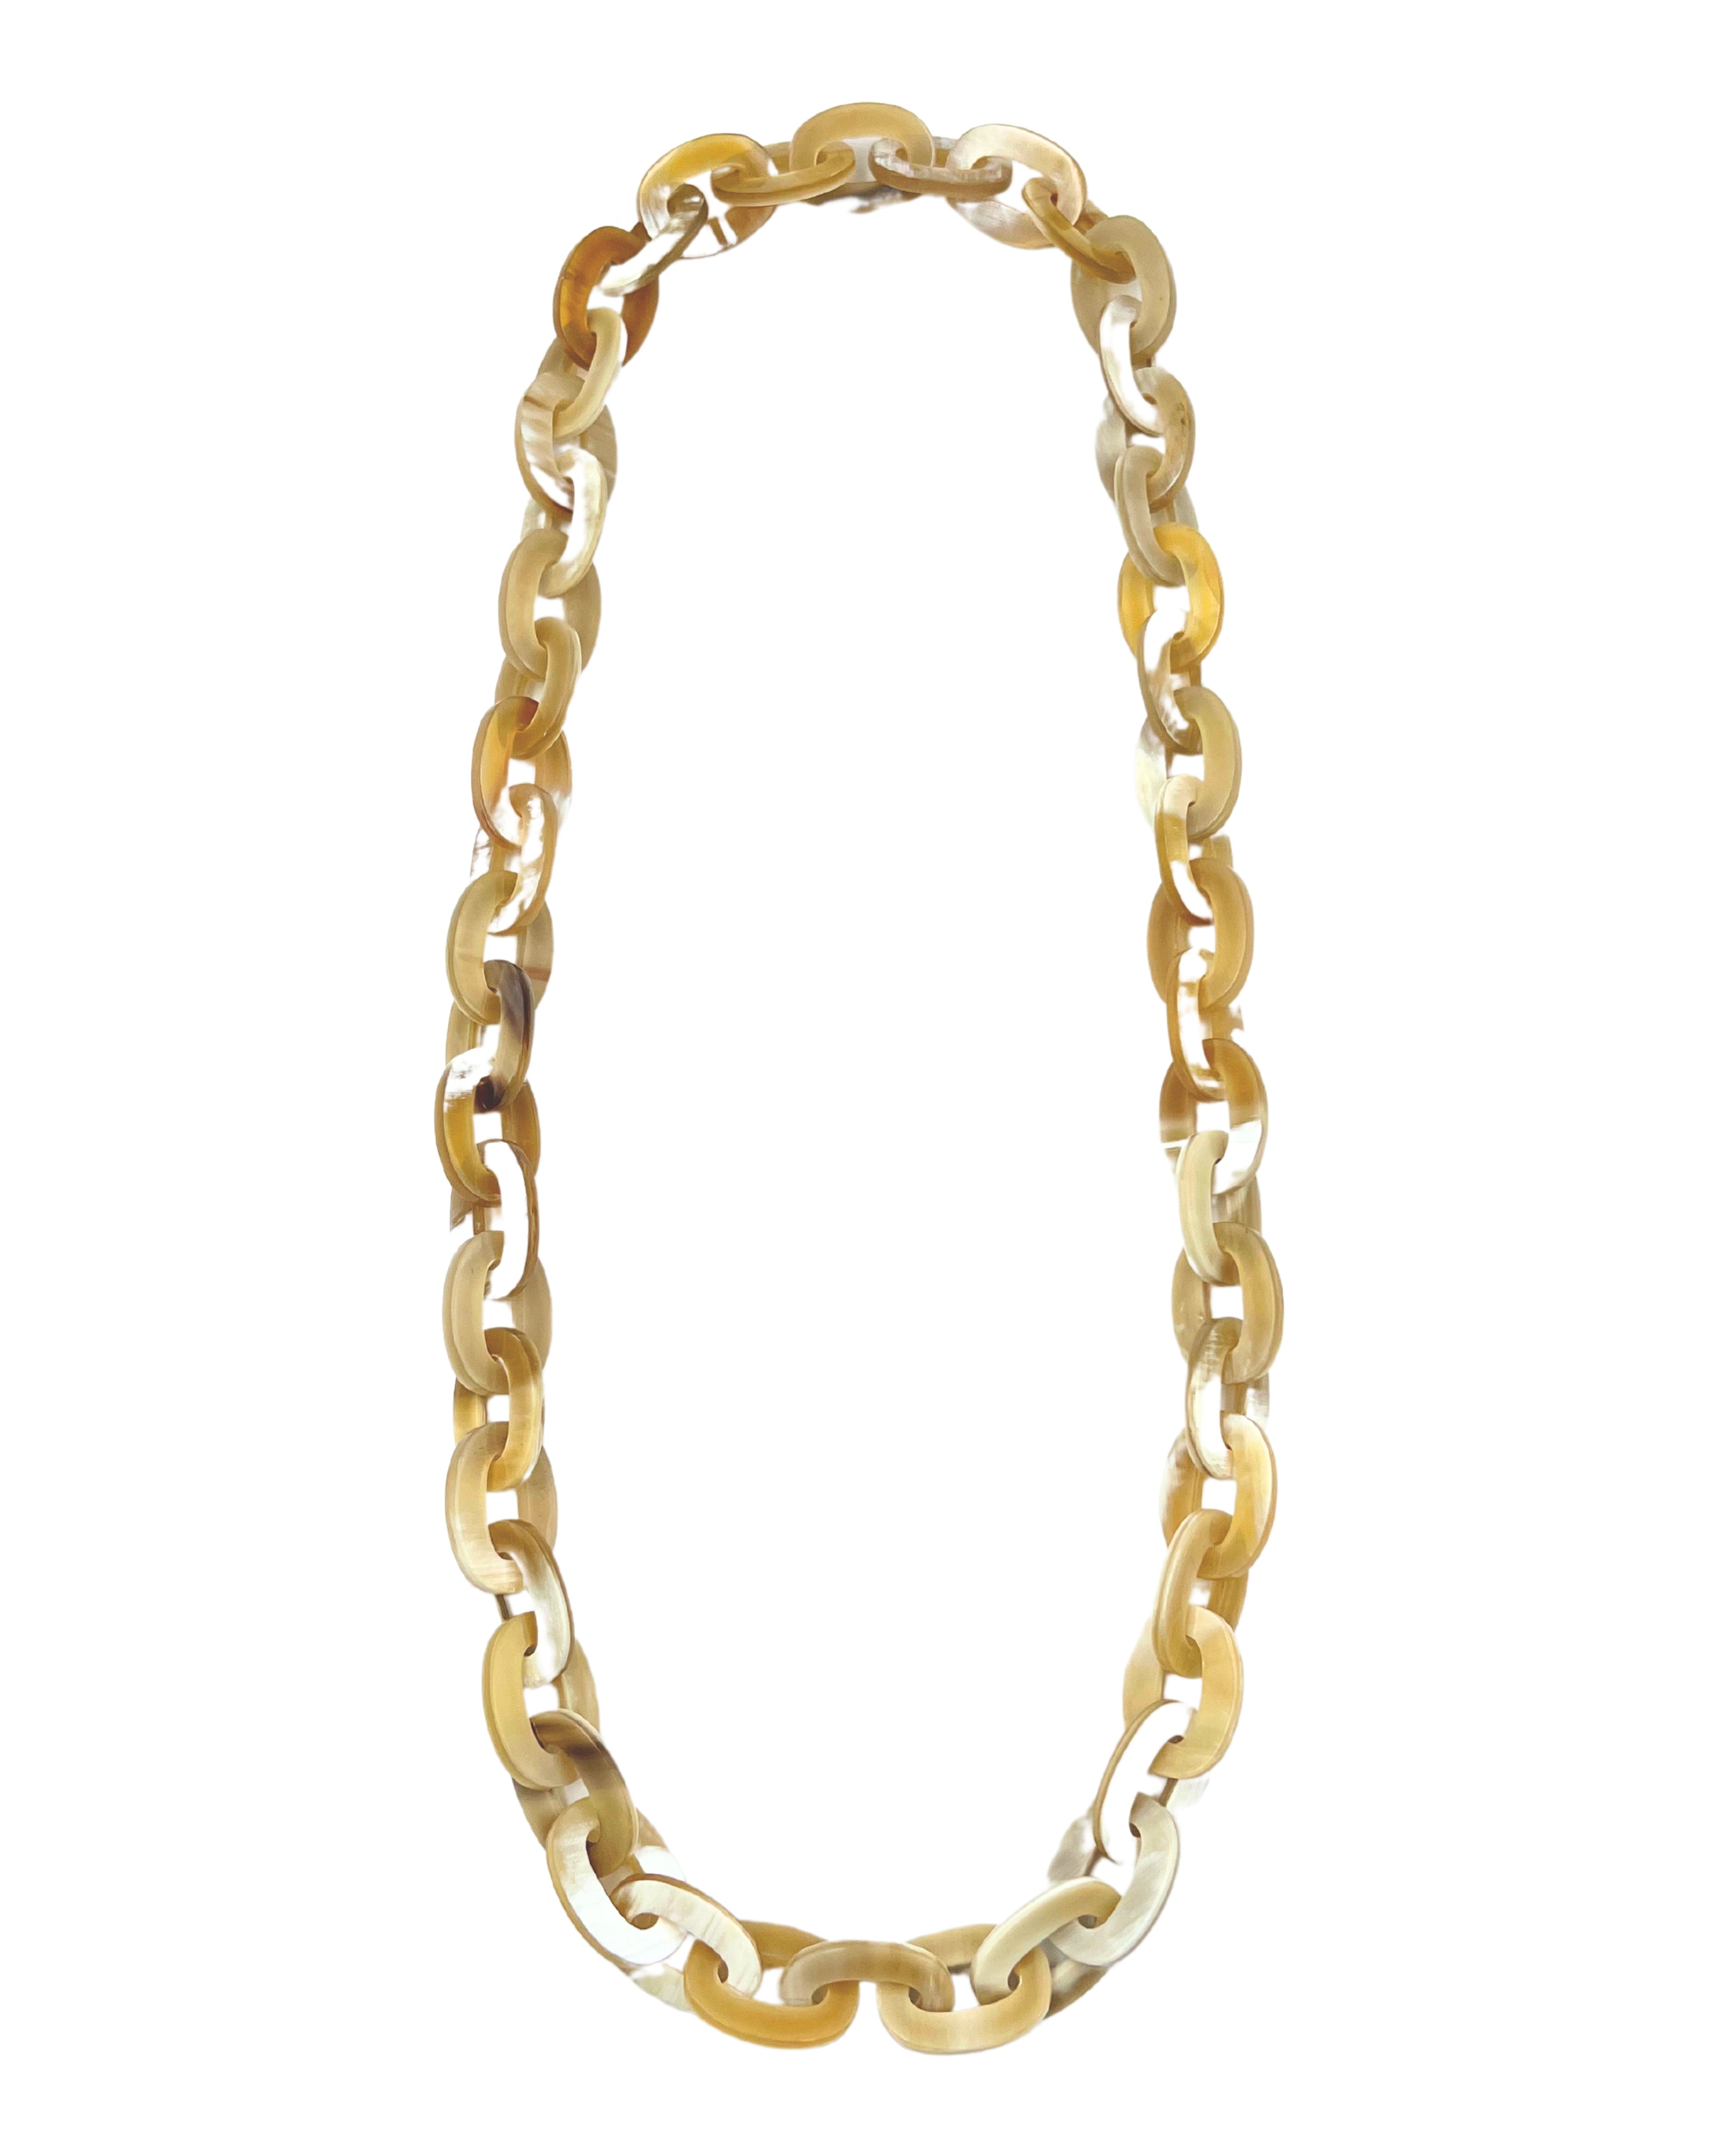 Blonde Horn Long Chainlink Necklace